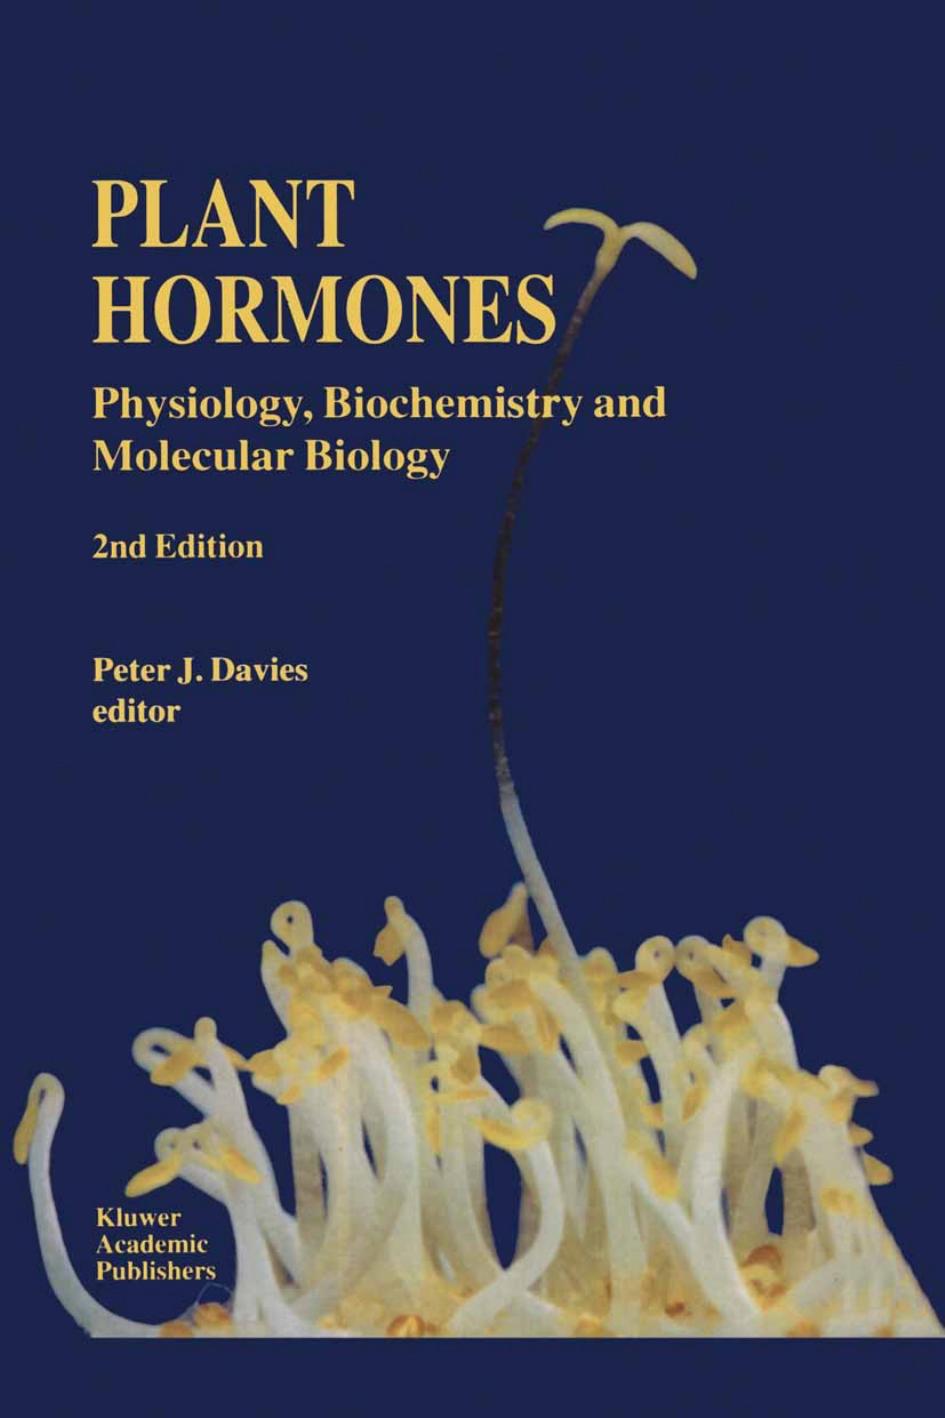 Plant Hormones  Physiology, Biochemistry and Molecular Biology ( PDFDrive ), 1995